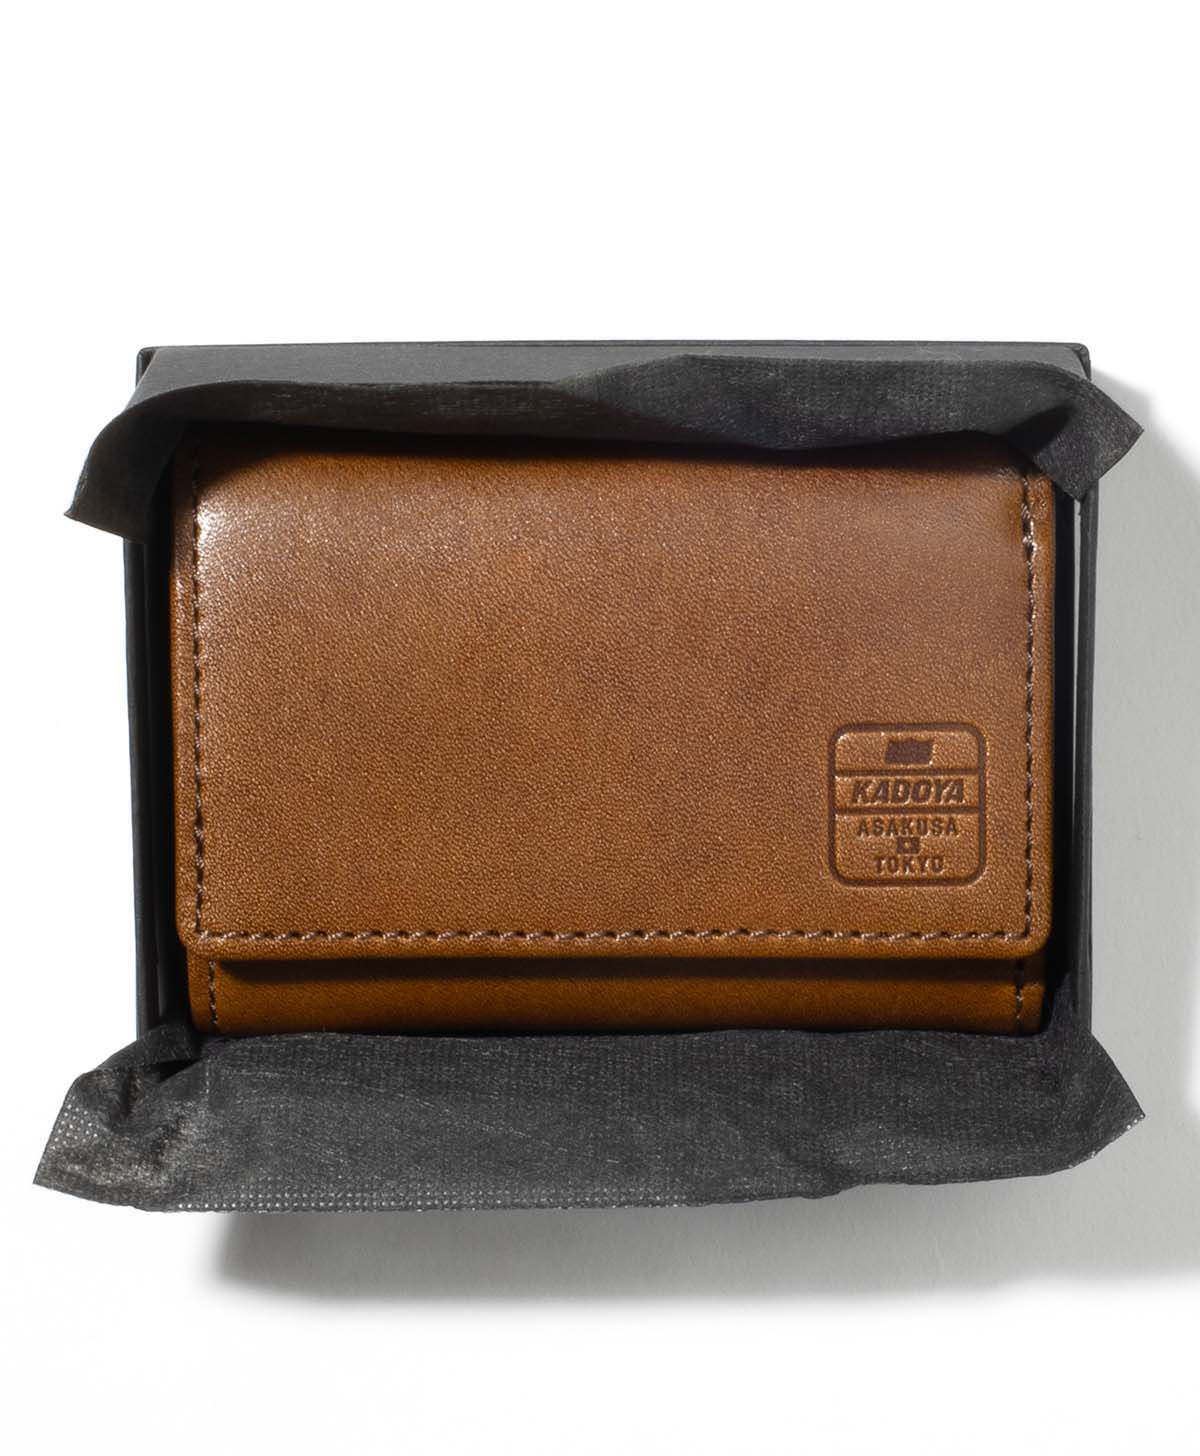 3FOLD COMPACT WALLET / BROWN